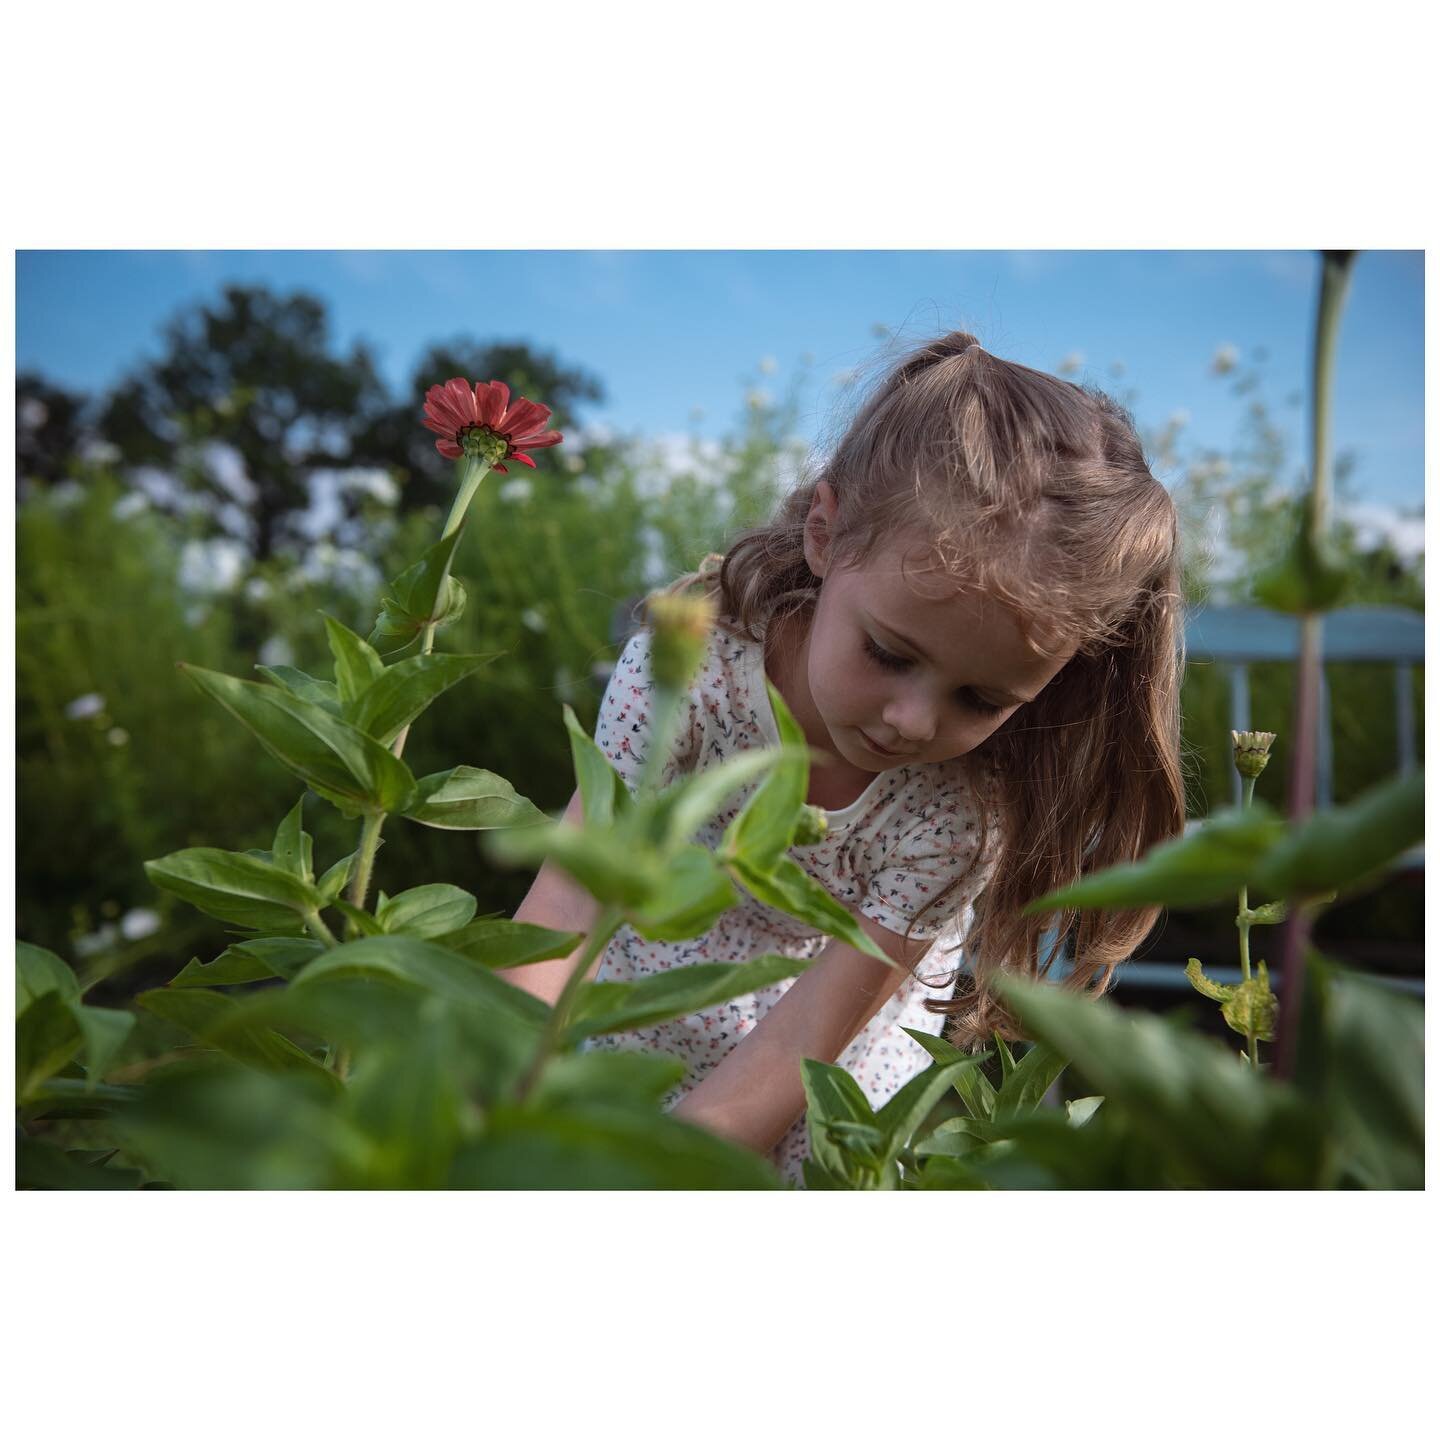 I know I have to wait until July, but this stretch of weather has got me VERY eager for fresh flower u-picks at @fieldsviewfarm 🌸🌷
.
.
.
#flowerpicking #southhavenmichigan #fieldsviewfarm #freshflowers #unposed #perfectlyimperfect #liveinthemoment 